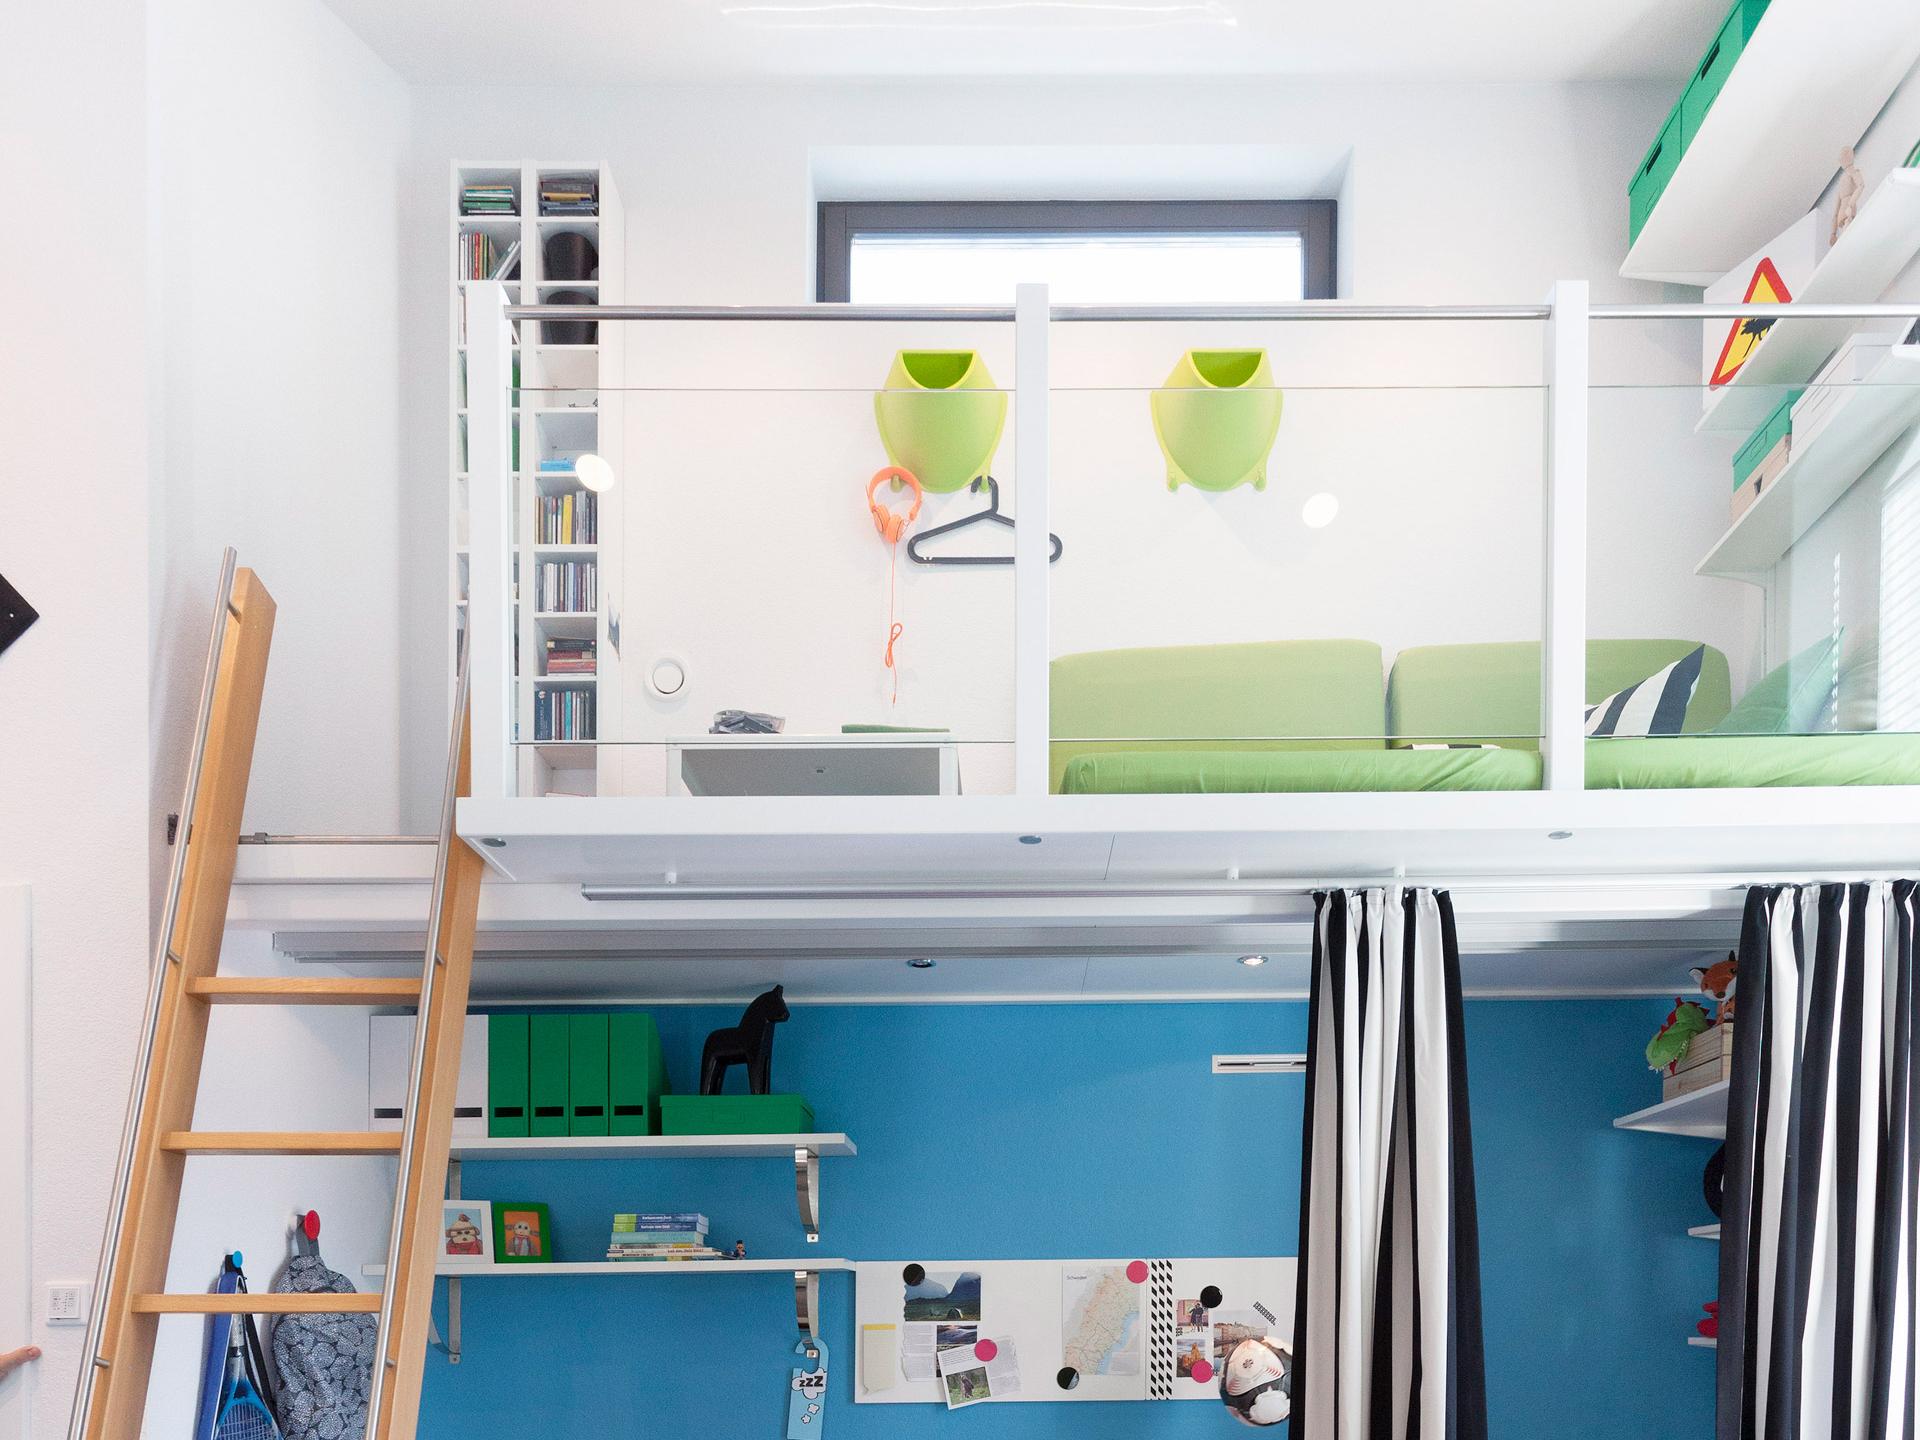 Gallery as a loft bed and Play area separation